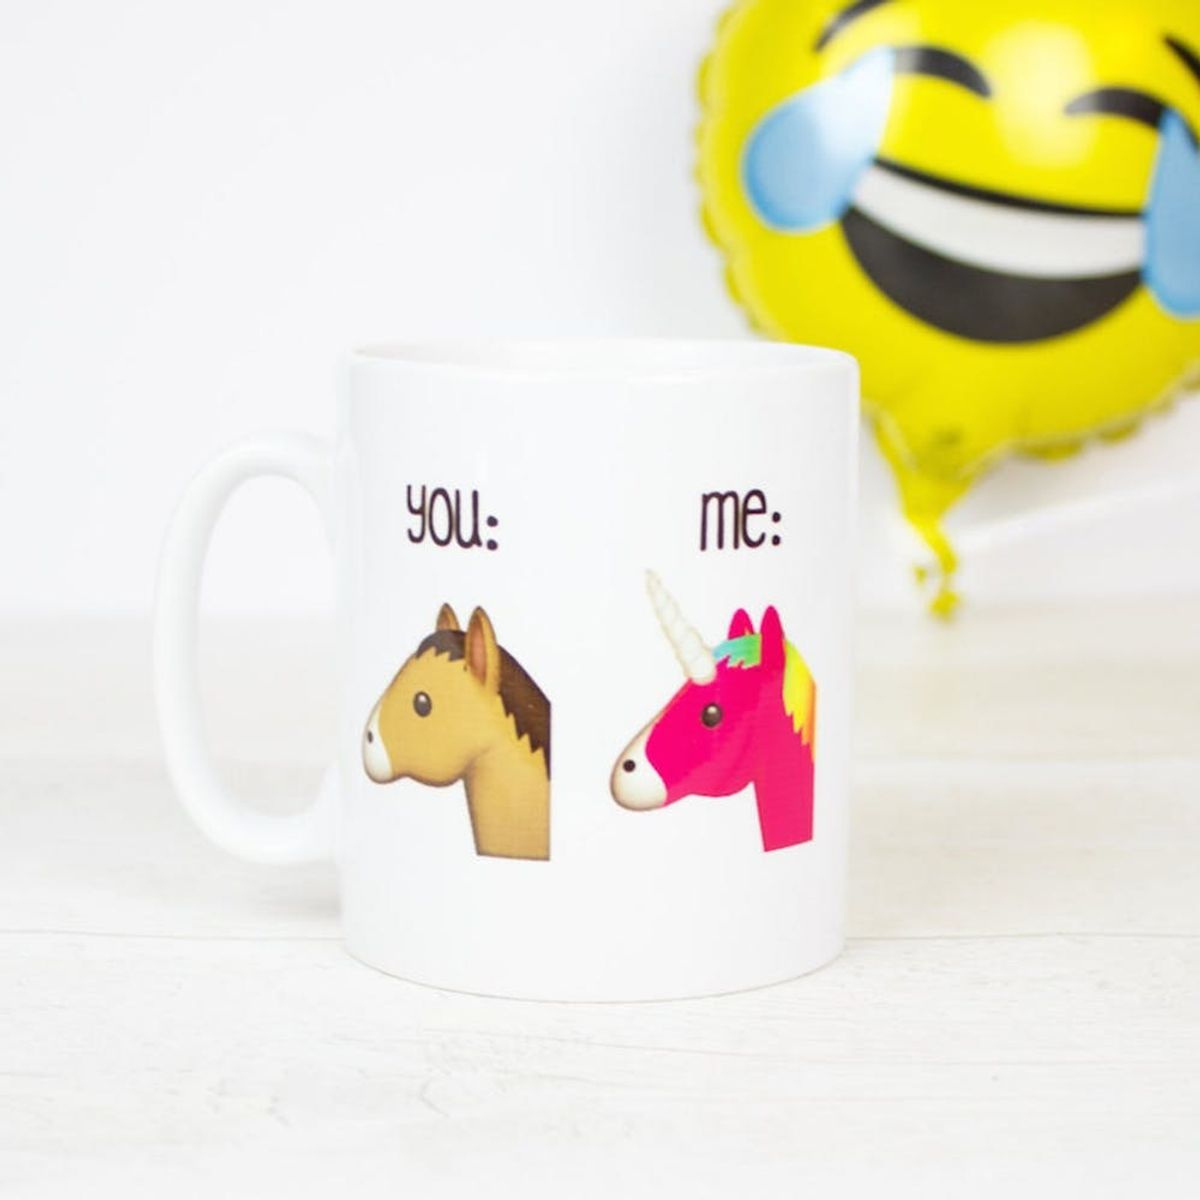 11 Reasons Why We Are Still *Heart Eyes* Over Emoji Gifts